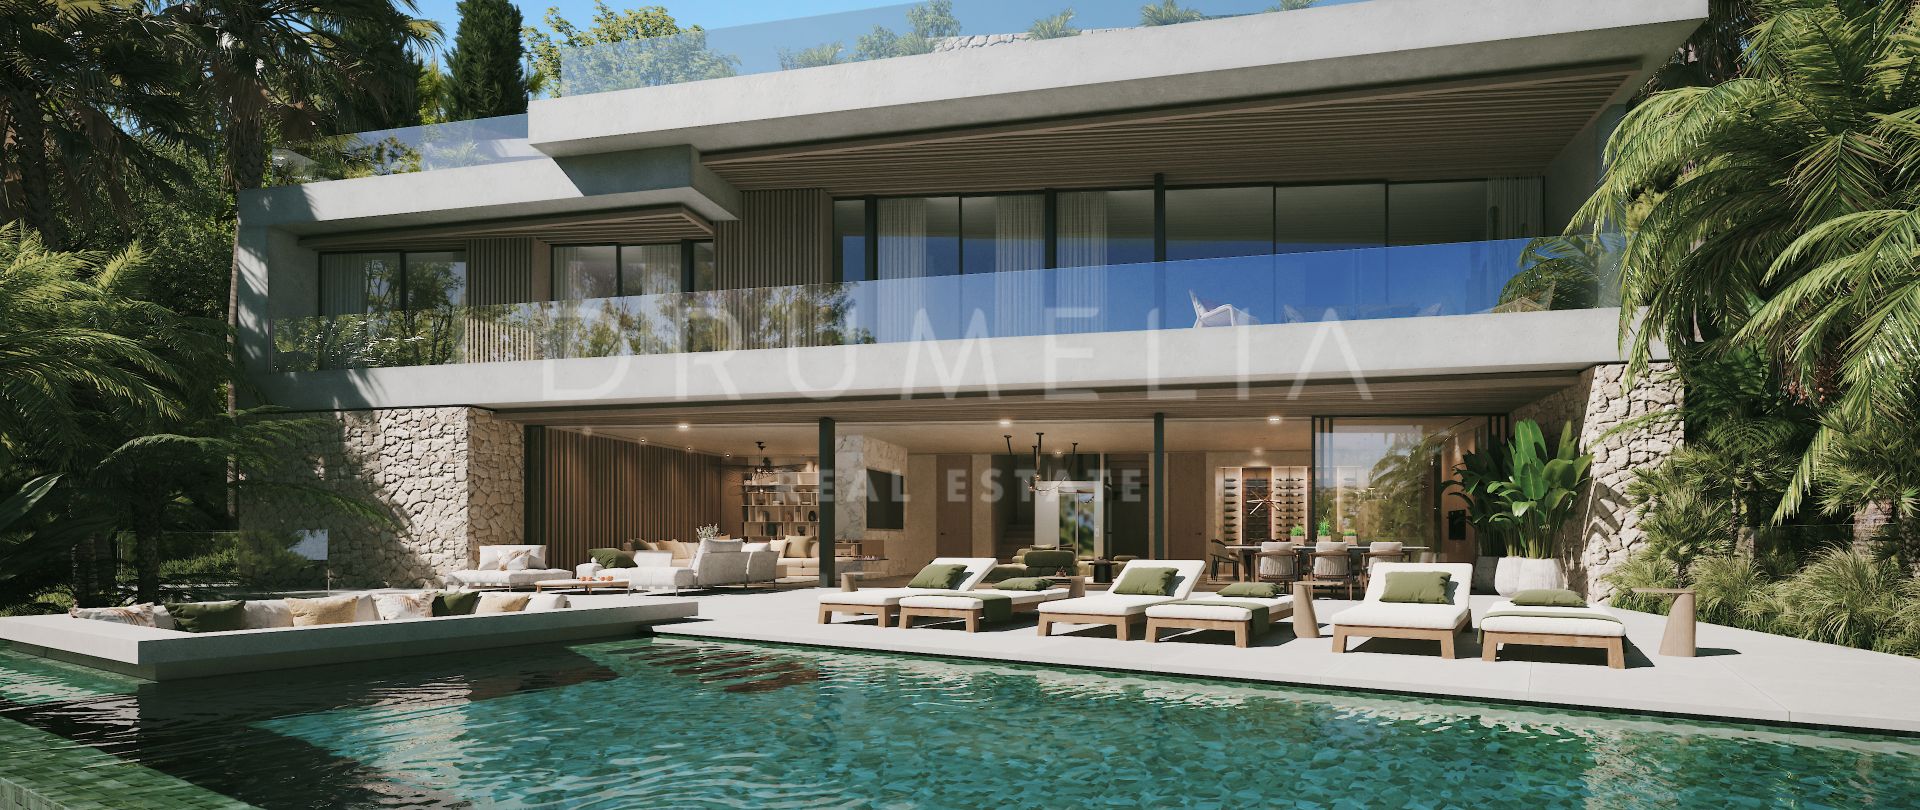 Luxurious Villa Project with Frontline Golf Positioning in Nueva Andalucia, Marbella